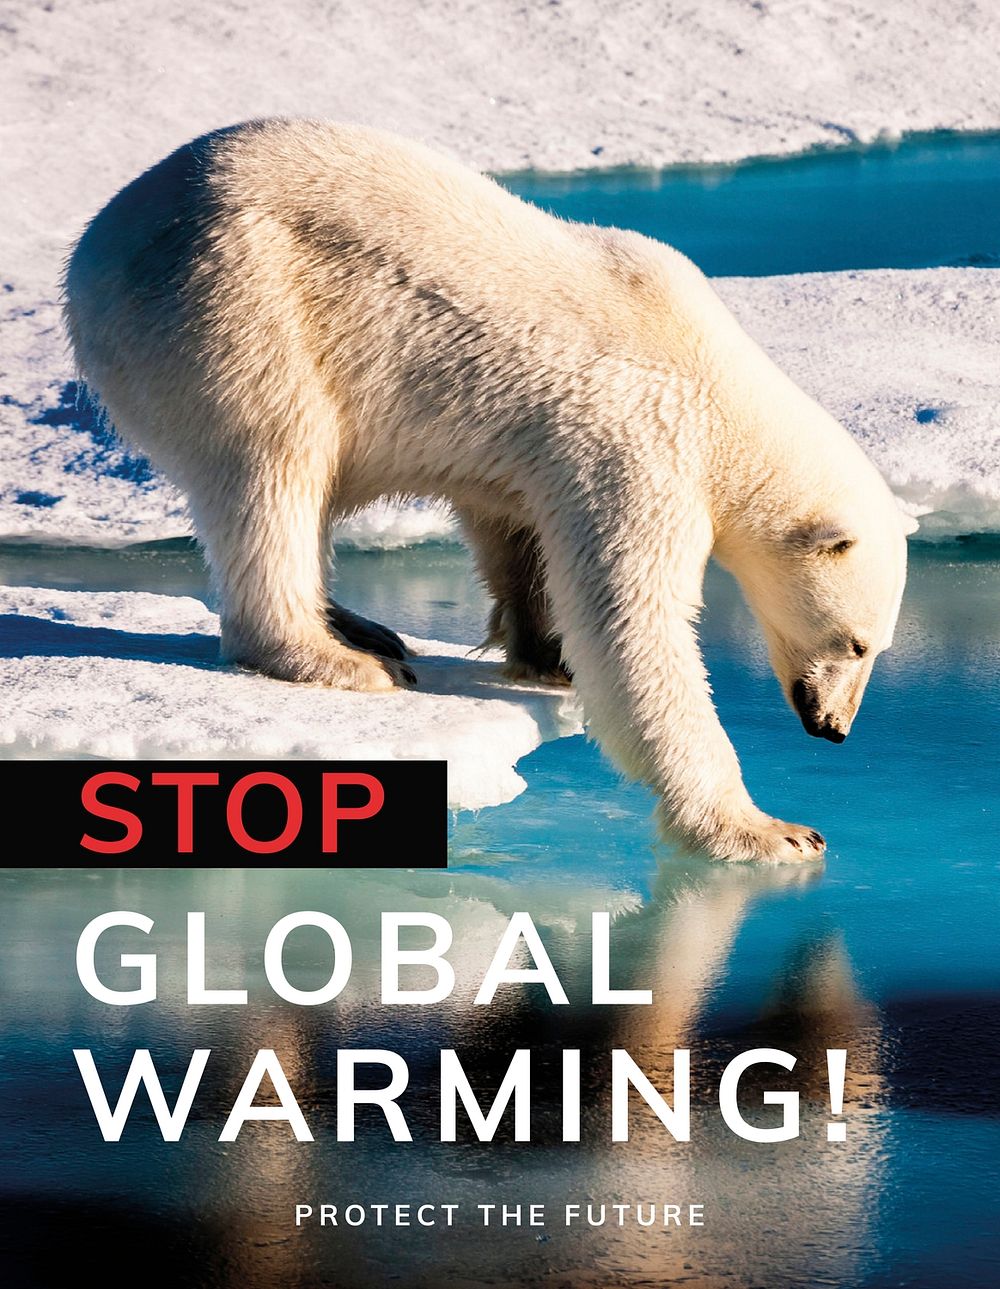 Global warming editable template psd to protect the future poster